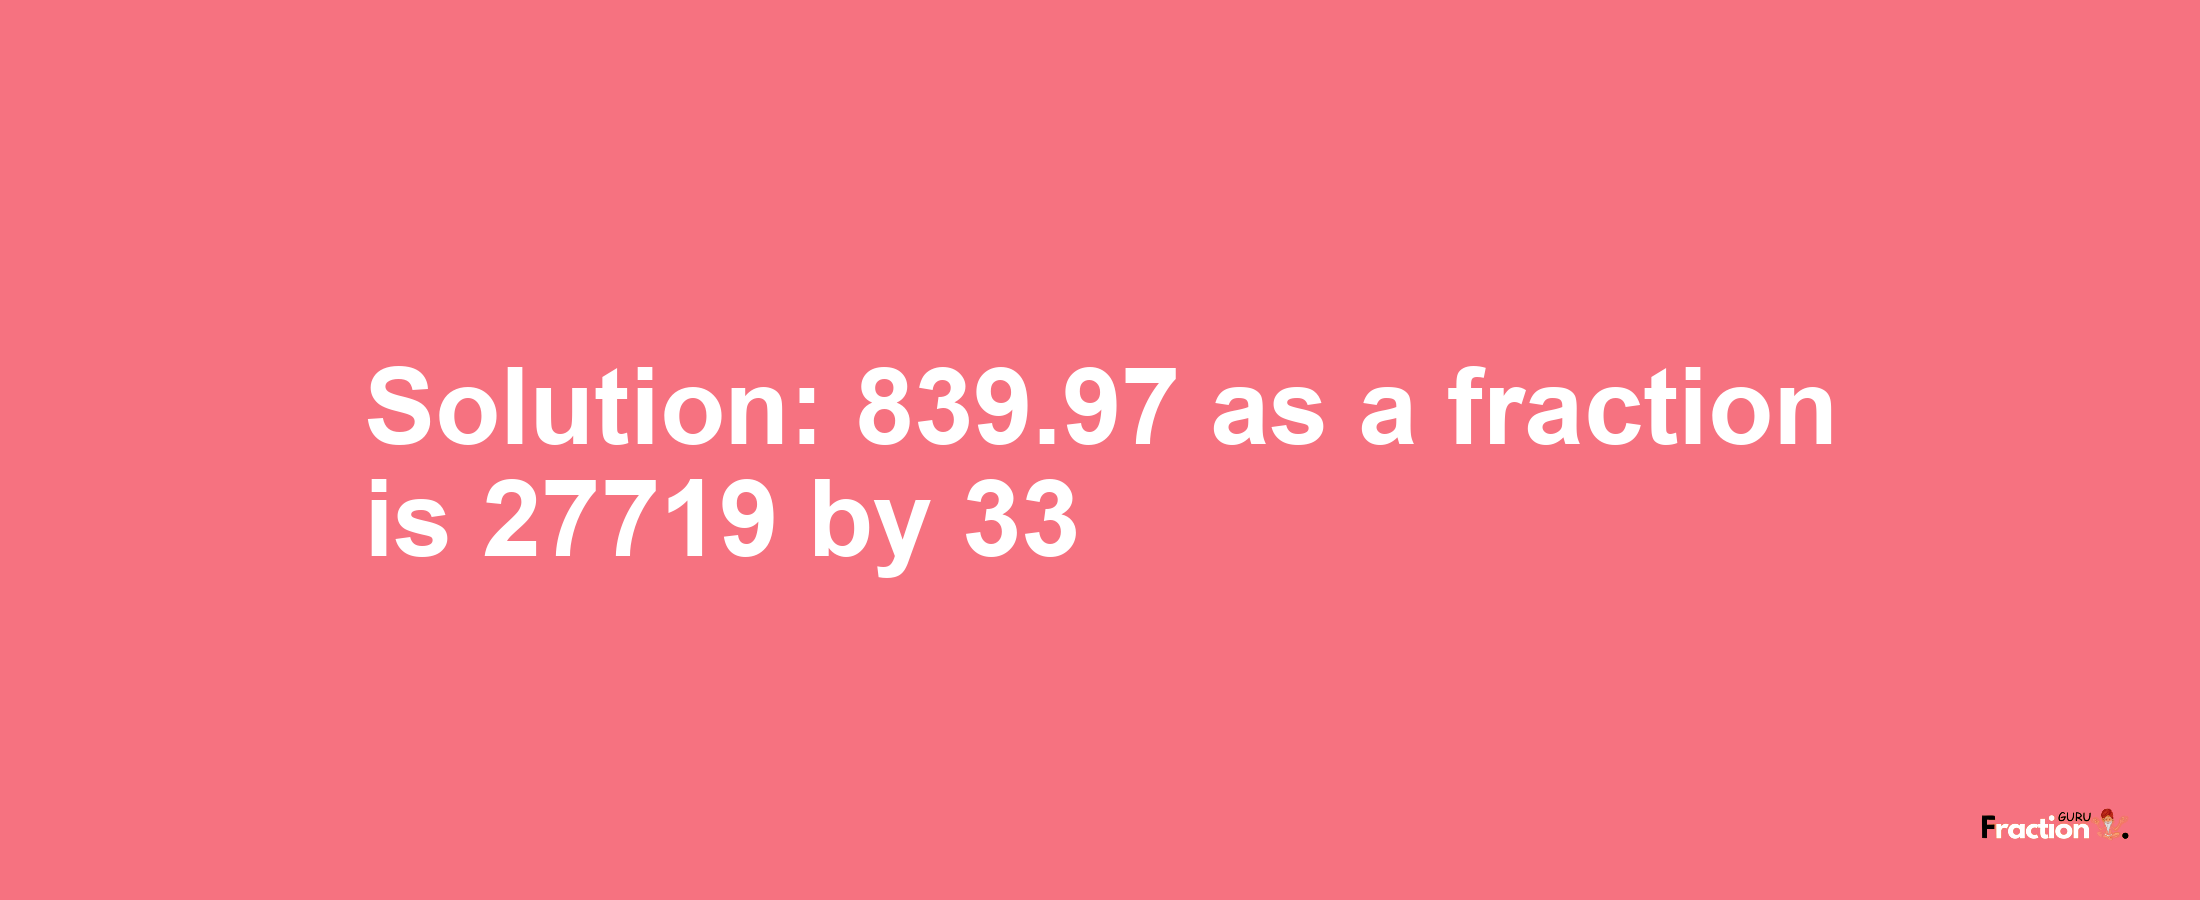 Solution:839.97 as a fraction is 27719/33